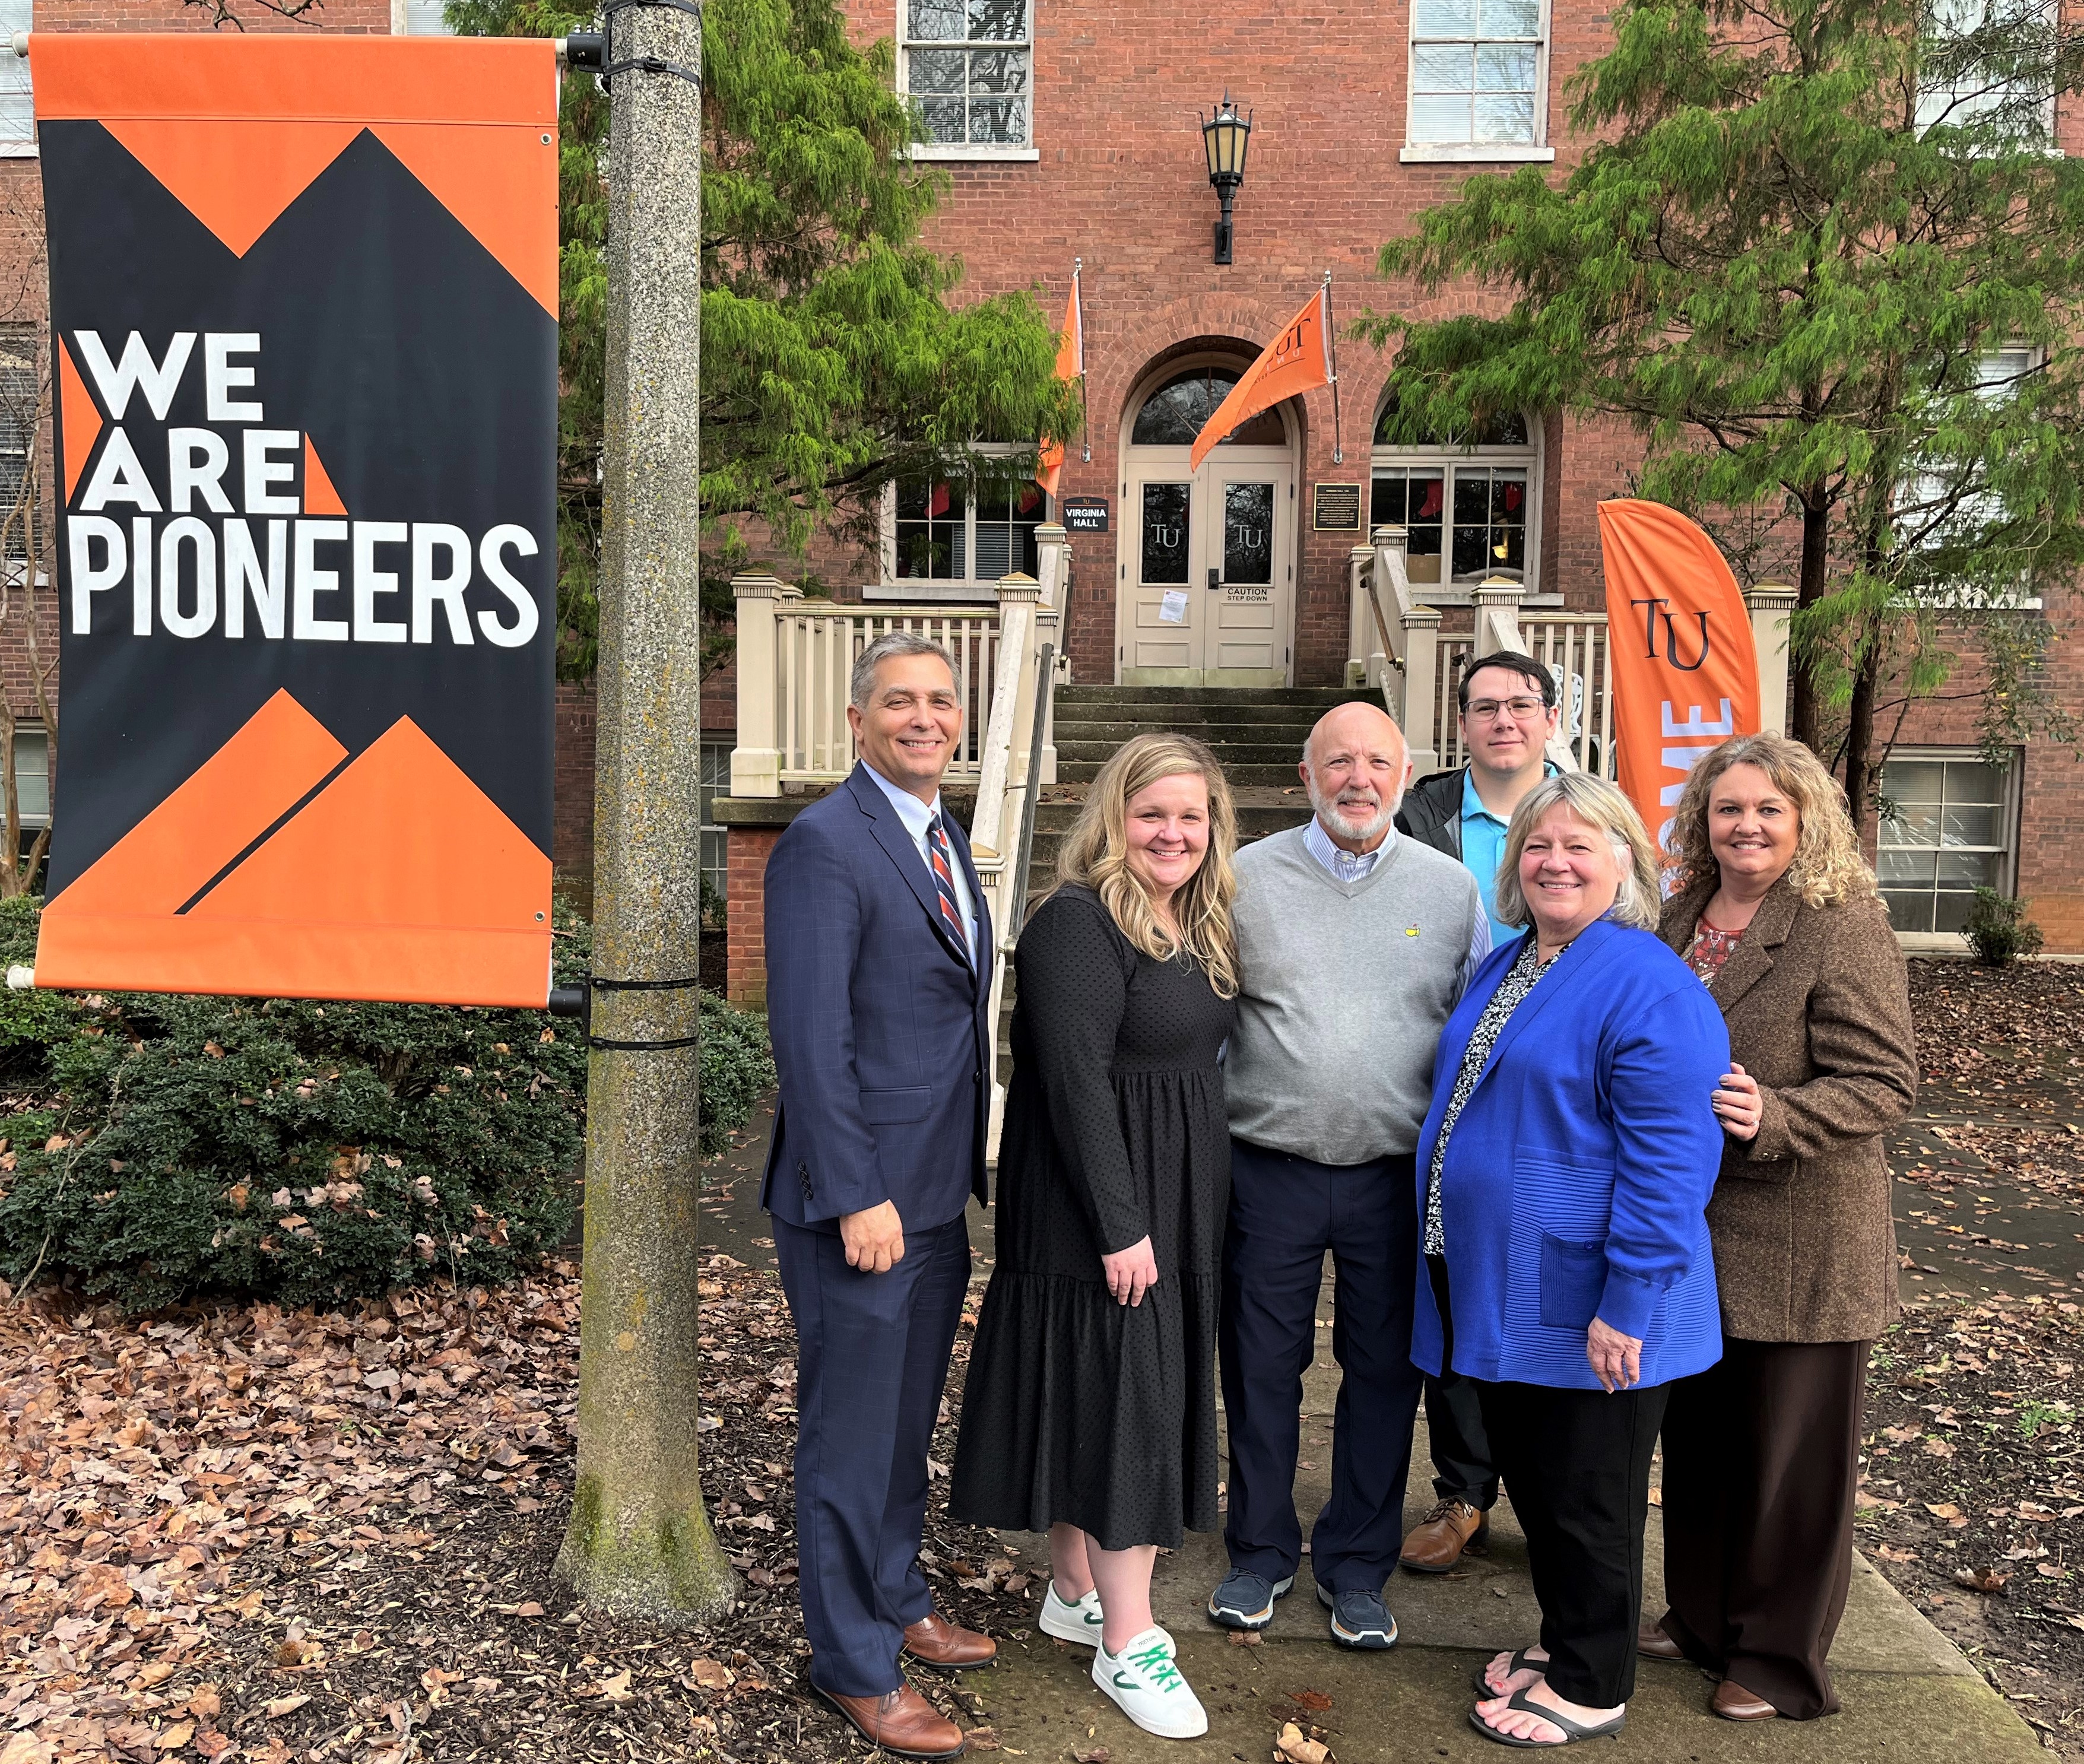 Left to right, Dr. Scott Hummel, Tusculum's president; Alison Sell, Harvey Sell, Dr. David Gonzalez, director of bands; Pam Sell, and Kim Kidwell, institutional advancement, gather on campus.